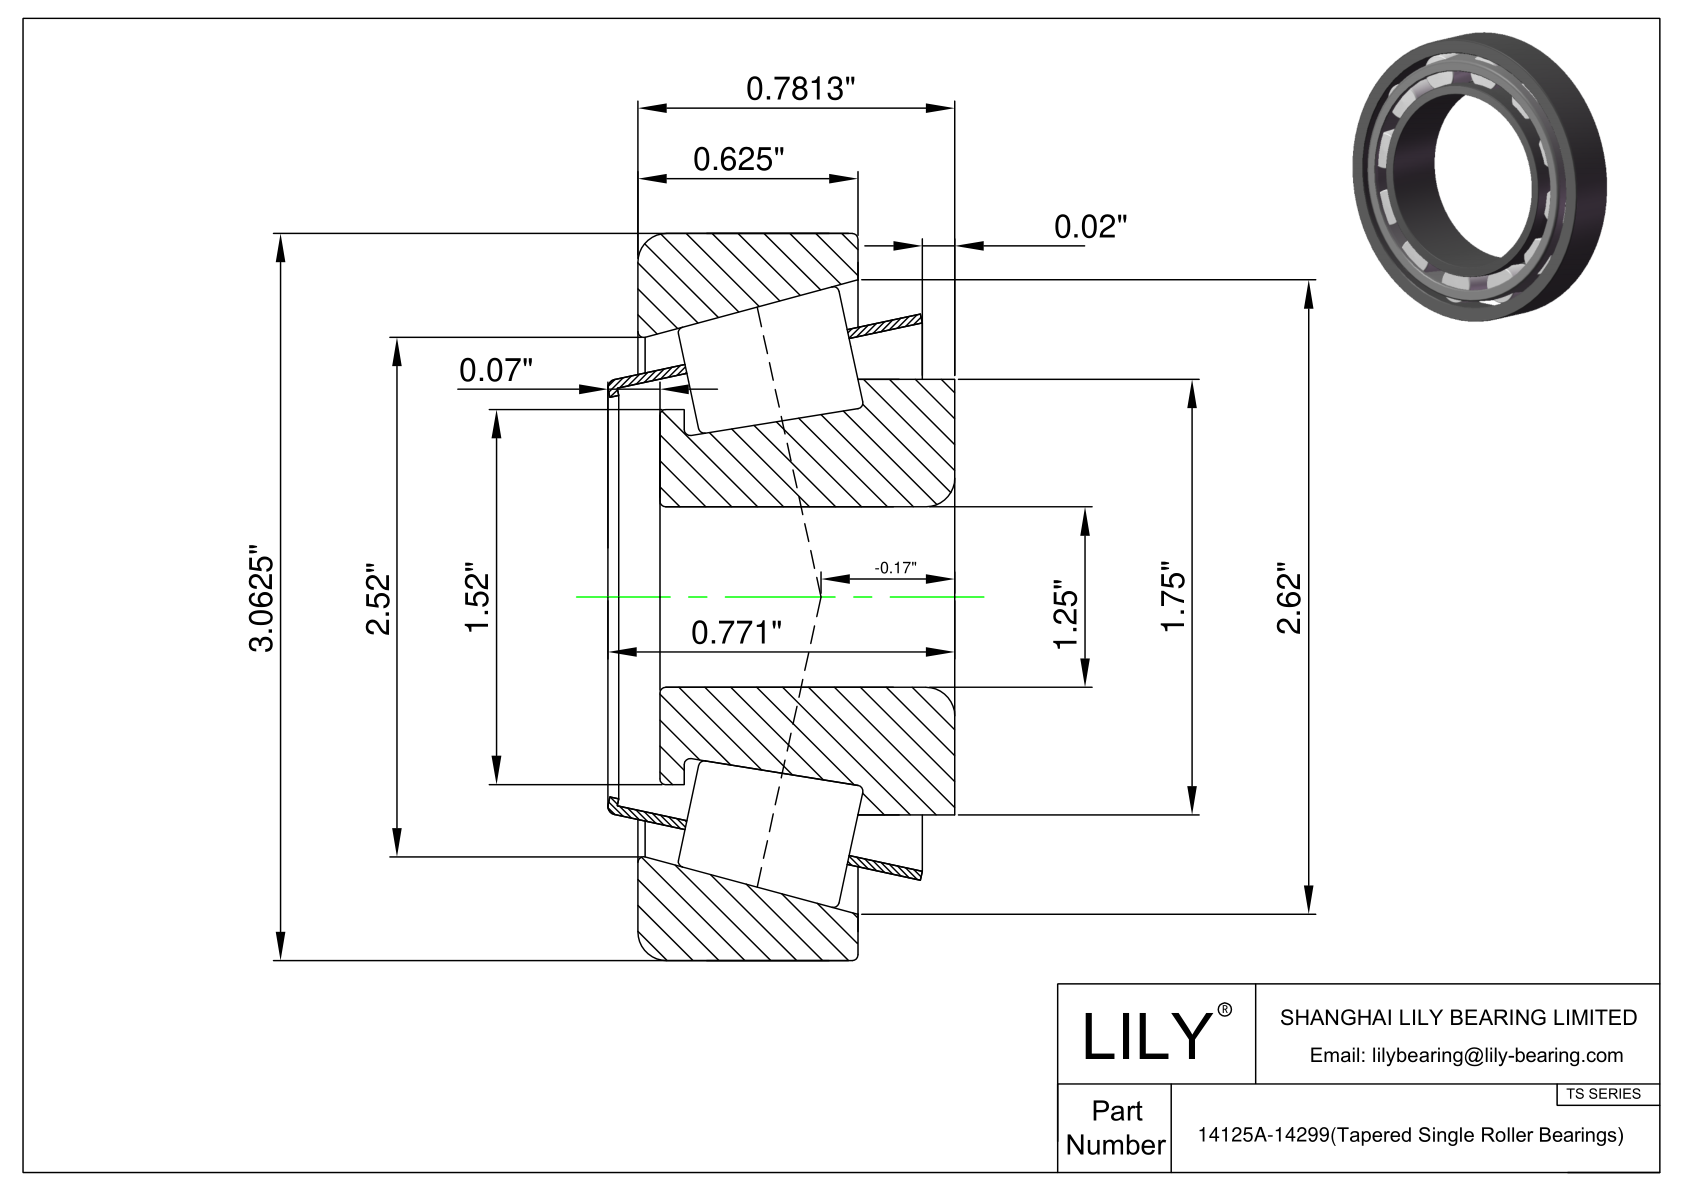 14125A-14299 TS (Tapered Single Roller Bearings) (Imperial) cad drawing